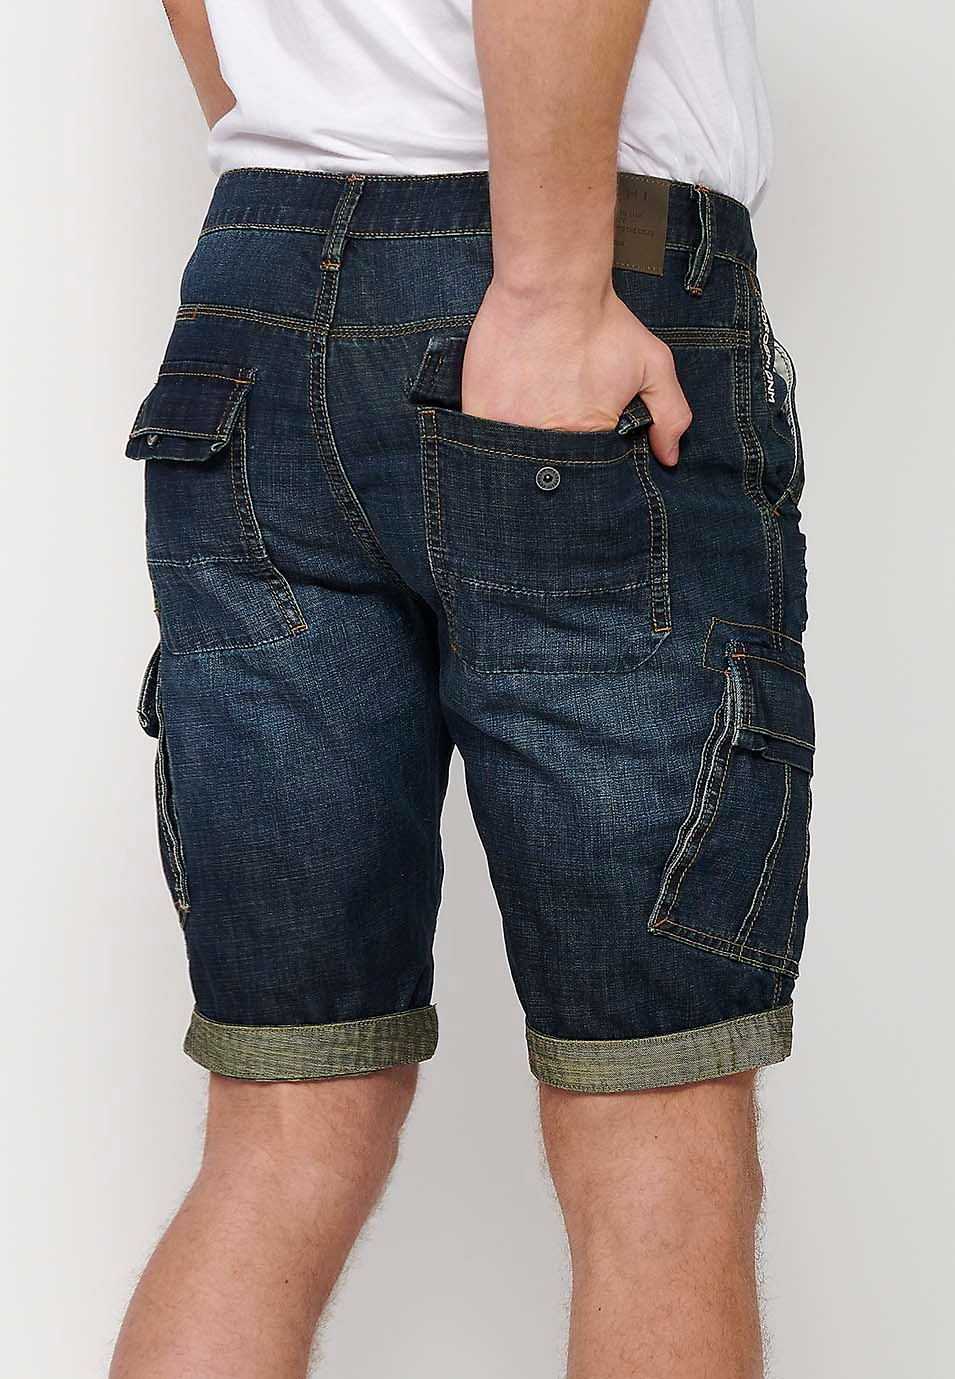 Blue Denim Bermuda Shorts with Side Cargo Pockets and Front Closure with Zipper and Button for Men 1